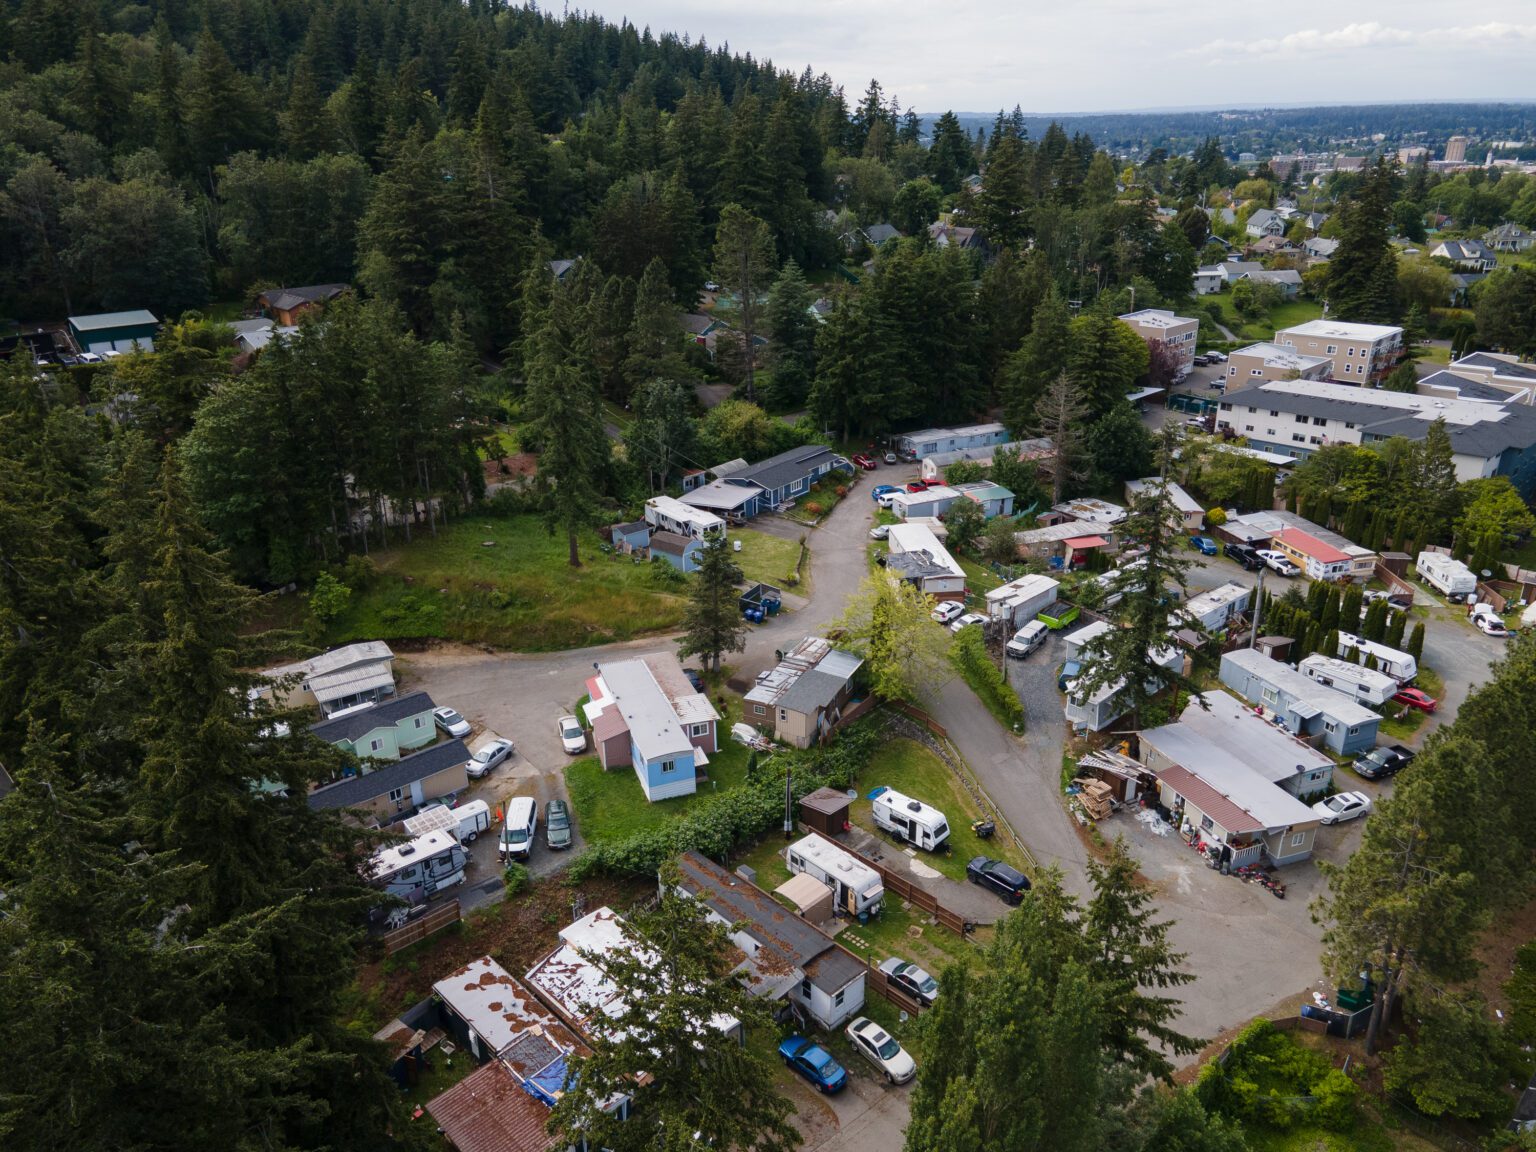 Samish Mobile Home Park with multiple mobile homes, cars and residential buildings surrounded by trees and other larger apartment complexes.